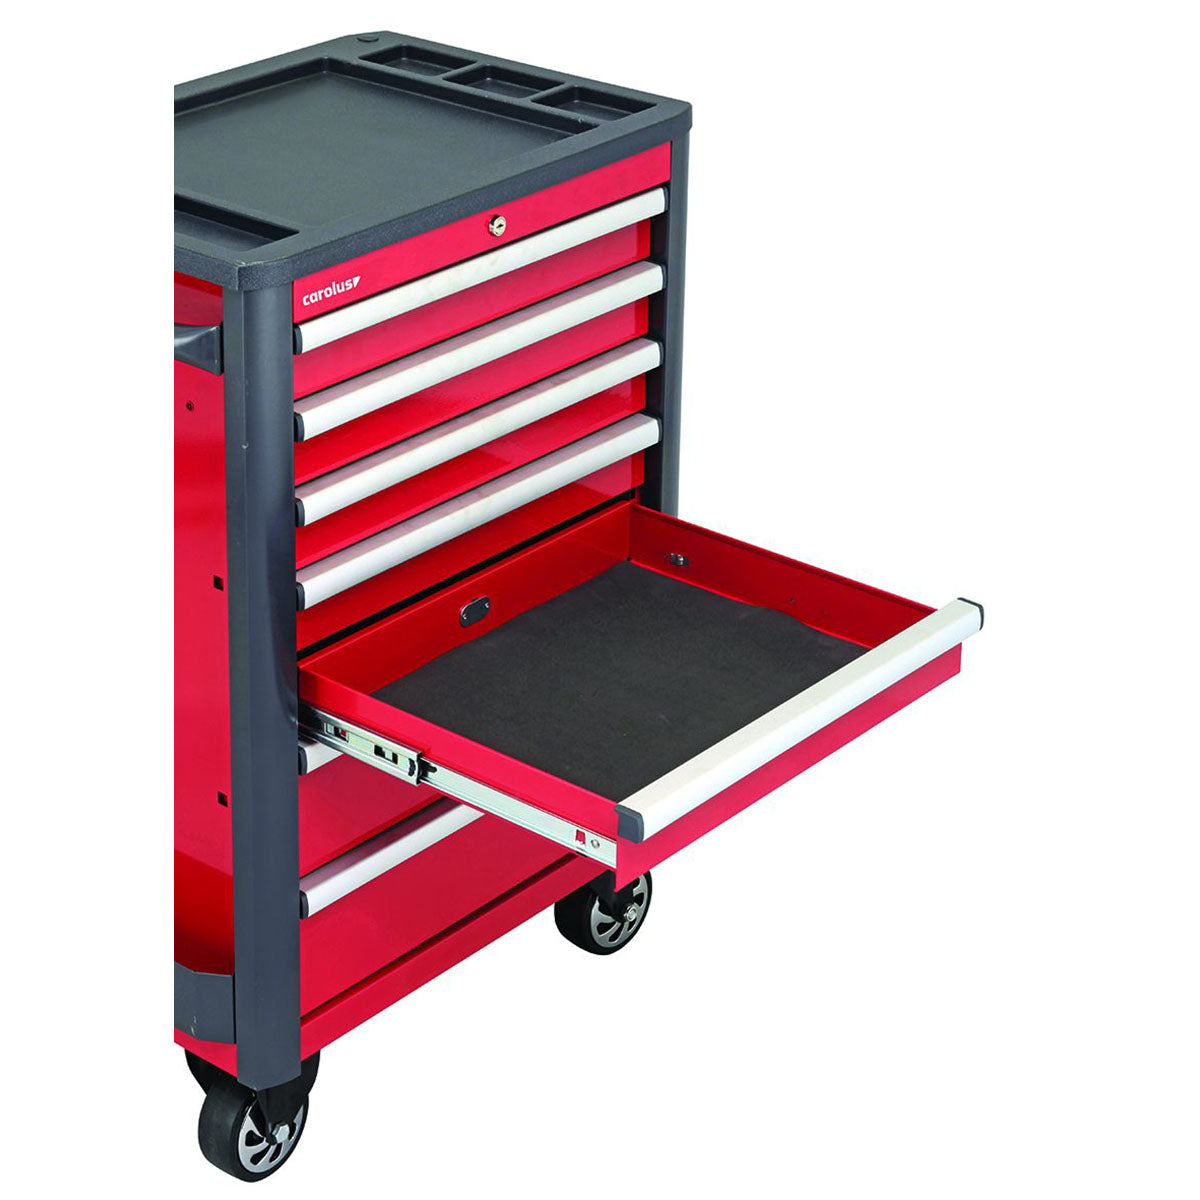 GEDORE red R20200007 - WINGMAN workshop trolley, with 7 drawers 1034x724x470 mm (3301690)